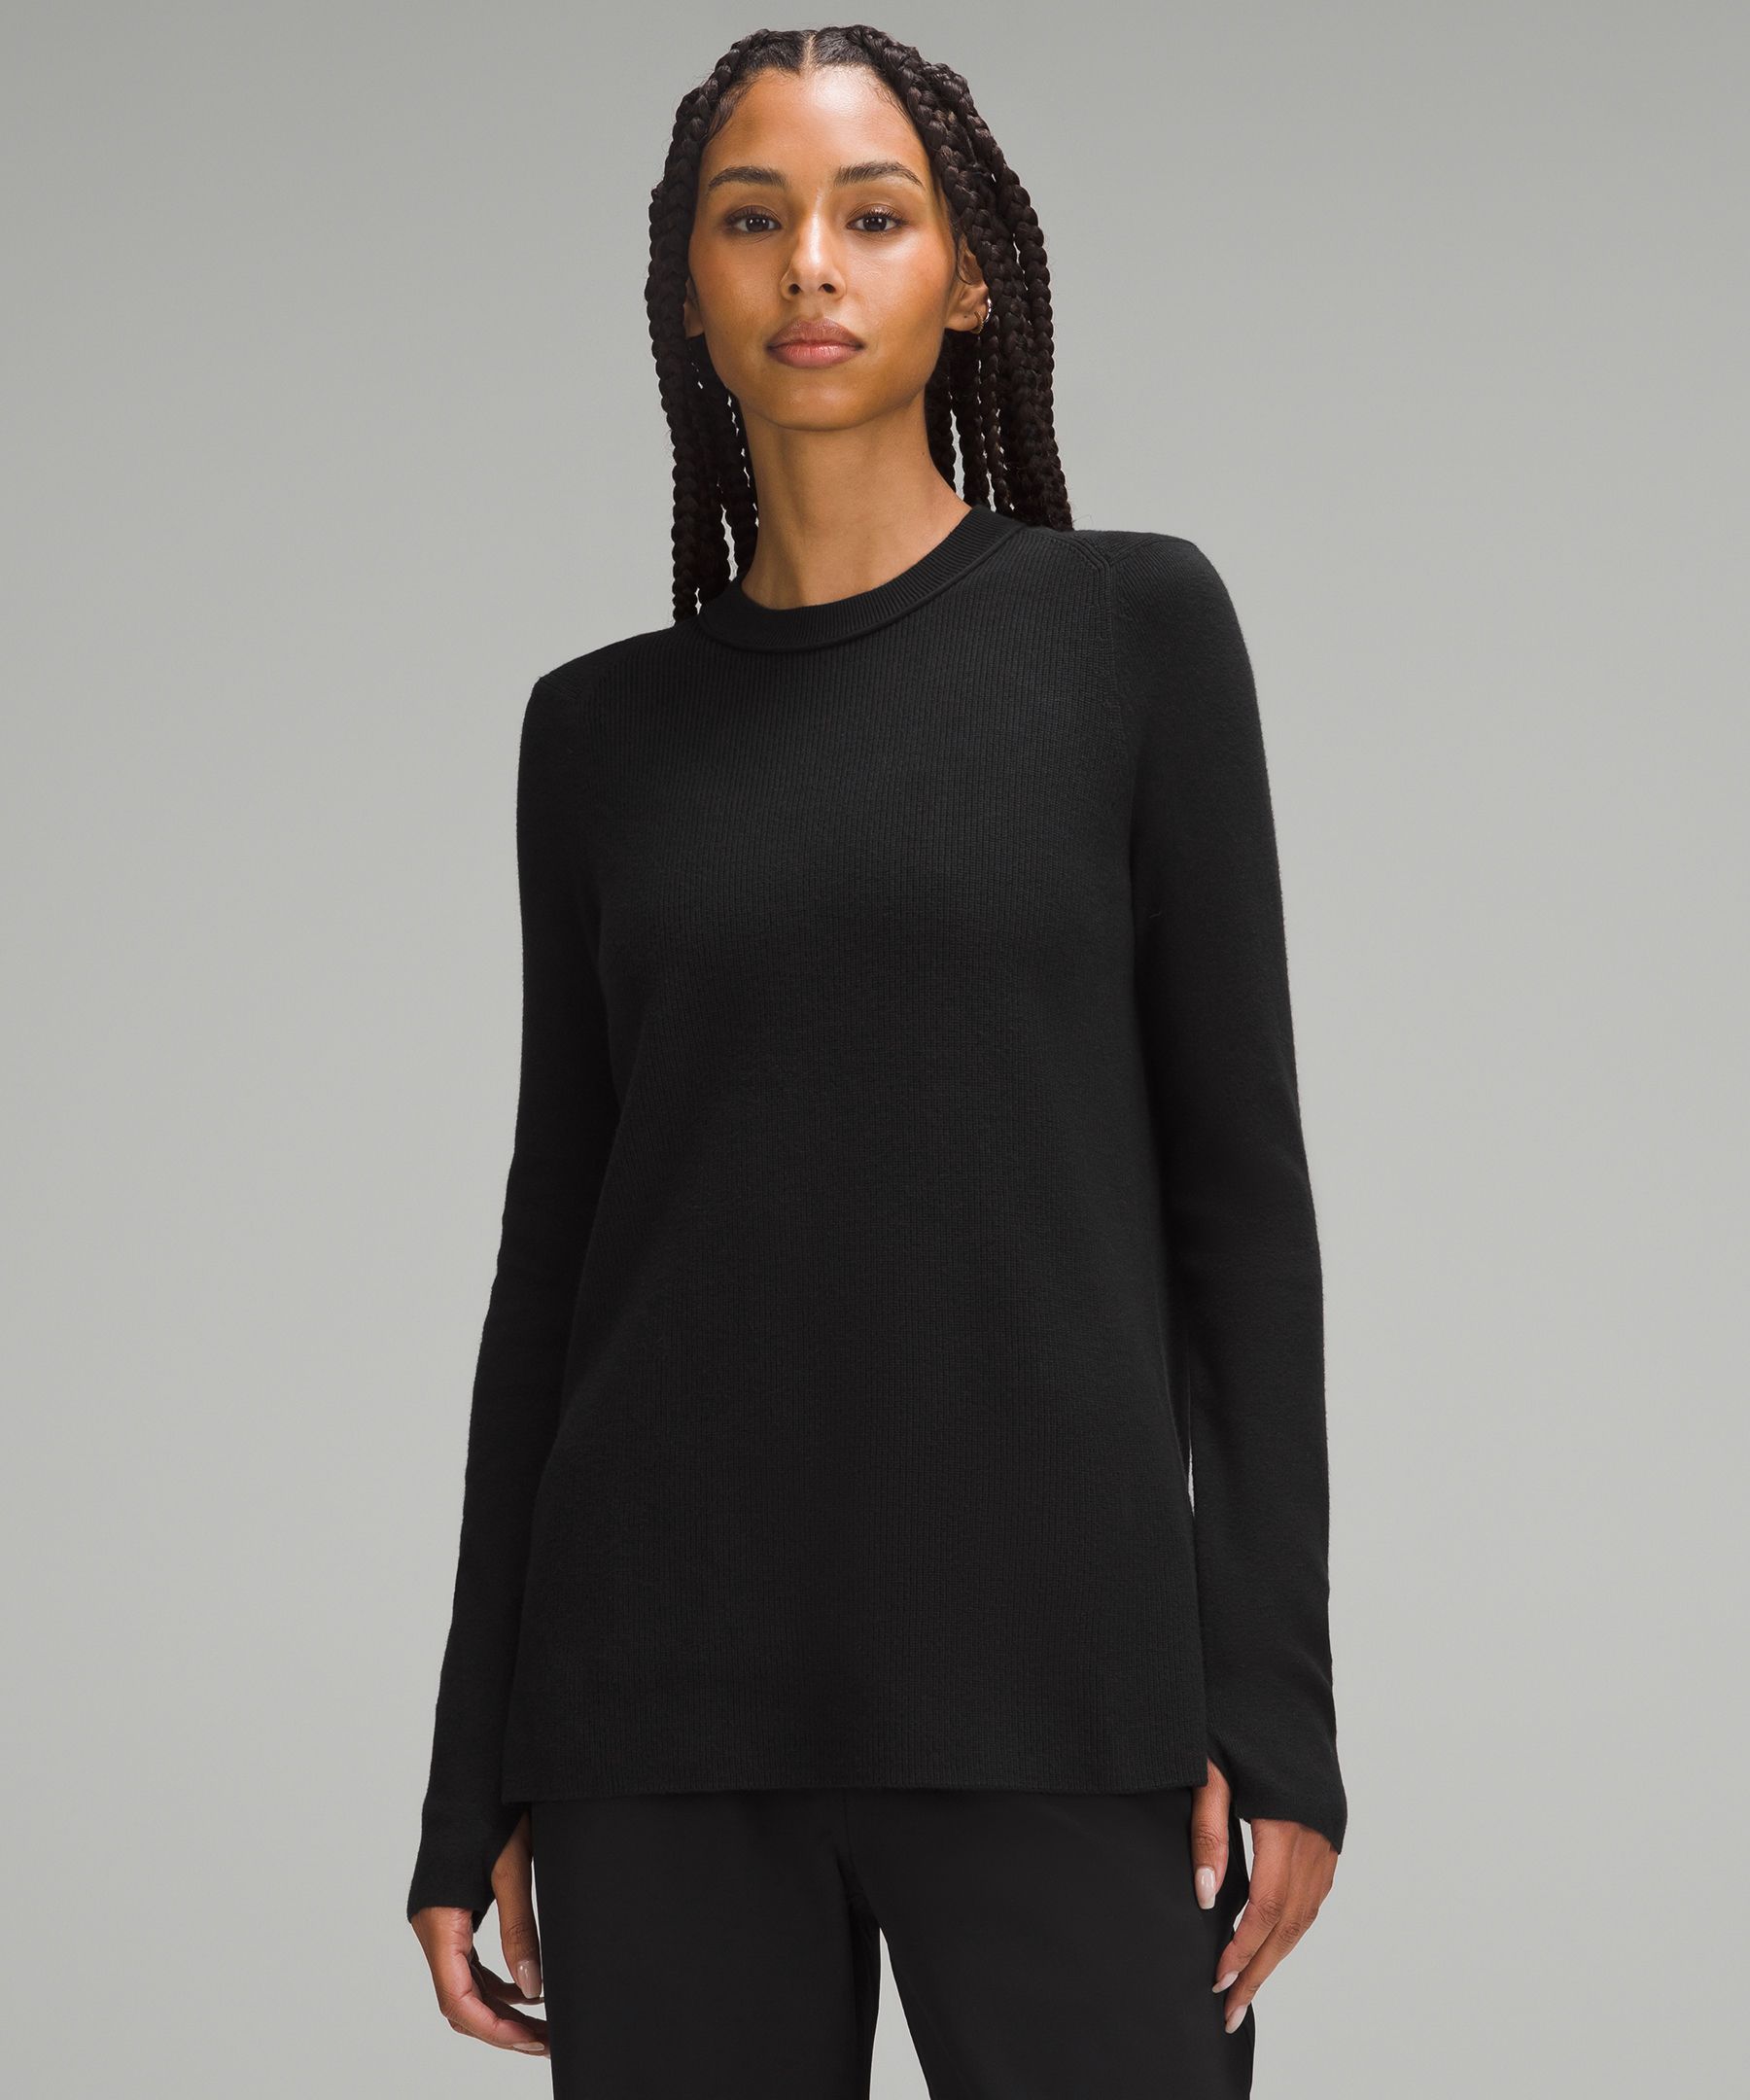 Lululemon Press Pause Pullover High Neck Sweatshirt in Black Size 8 - $36 -  From Emily